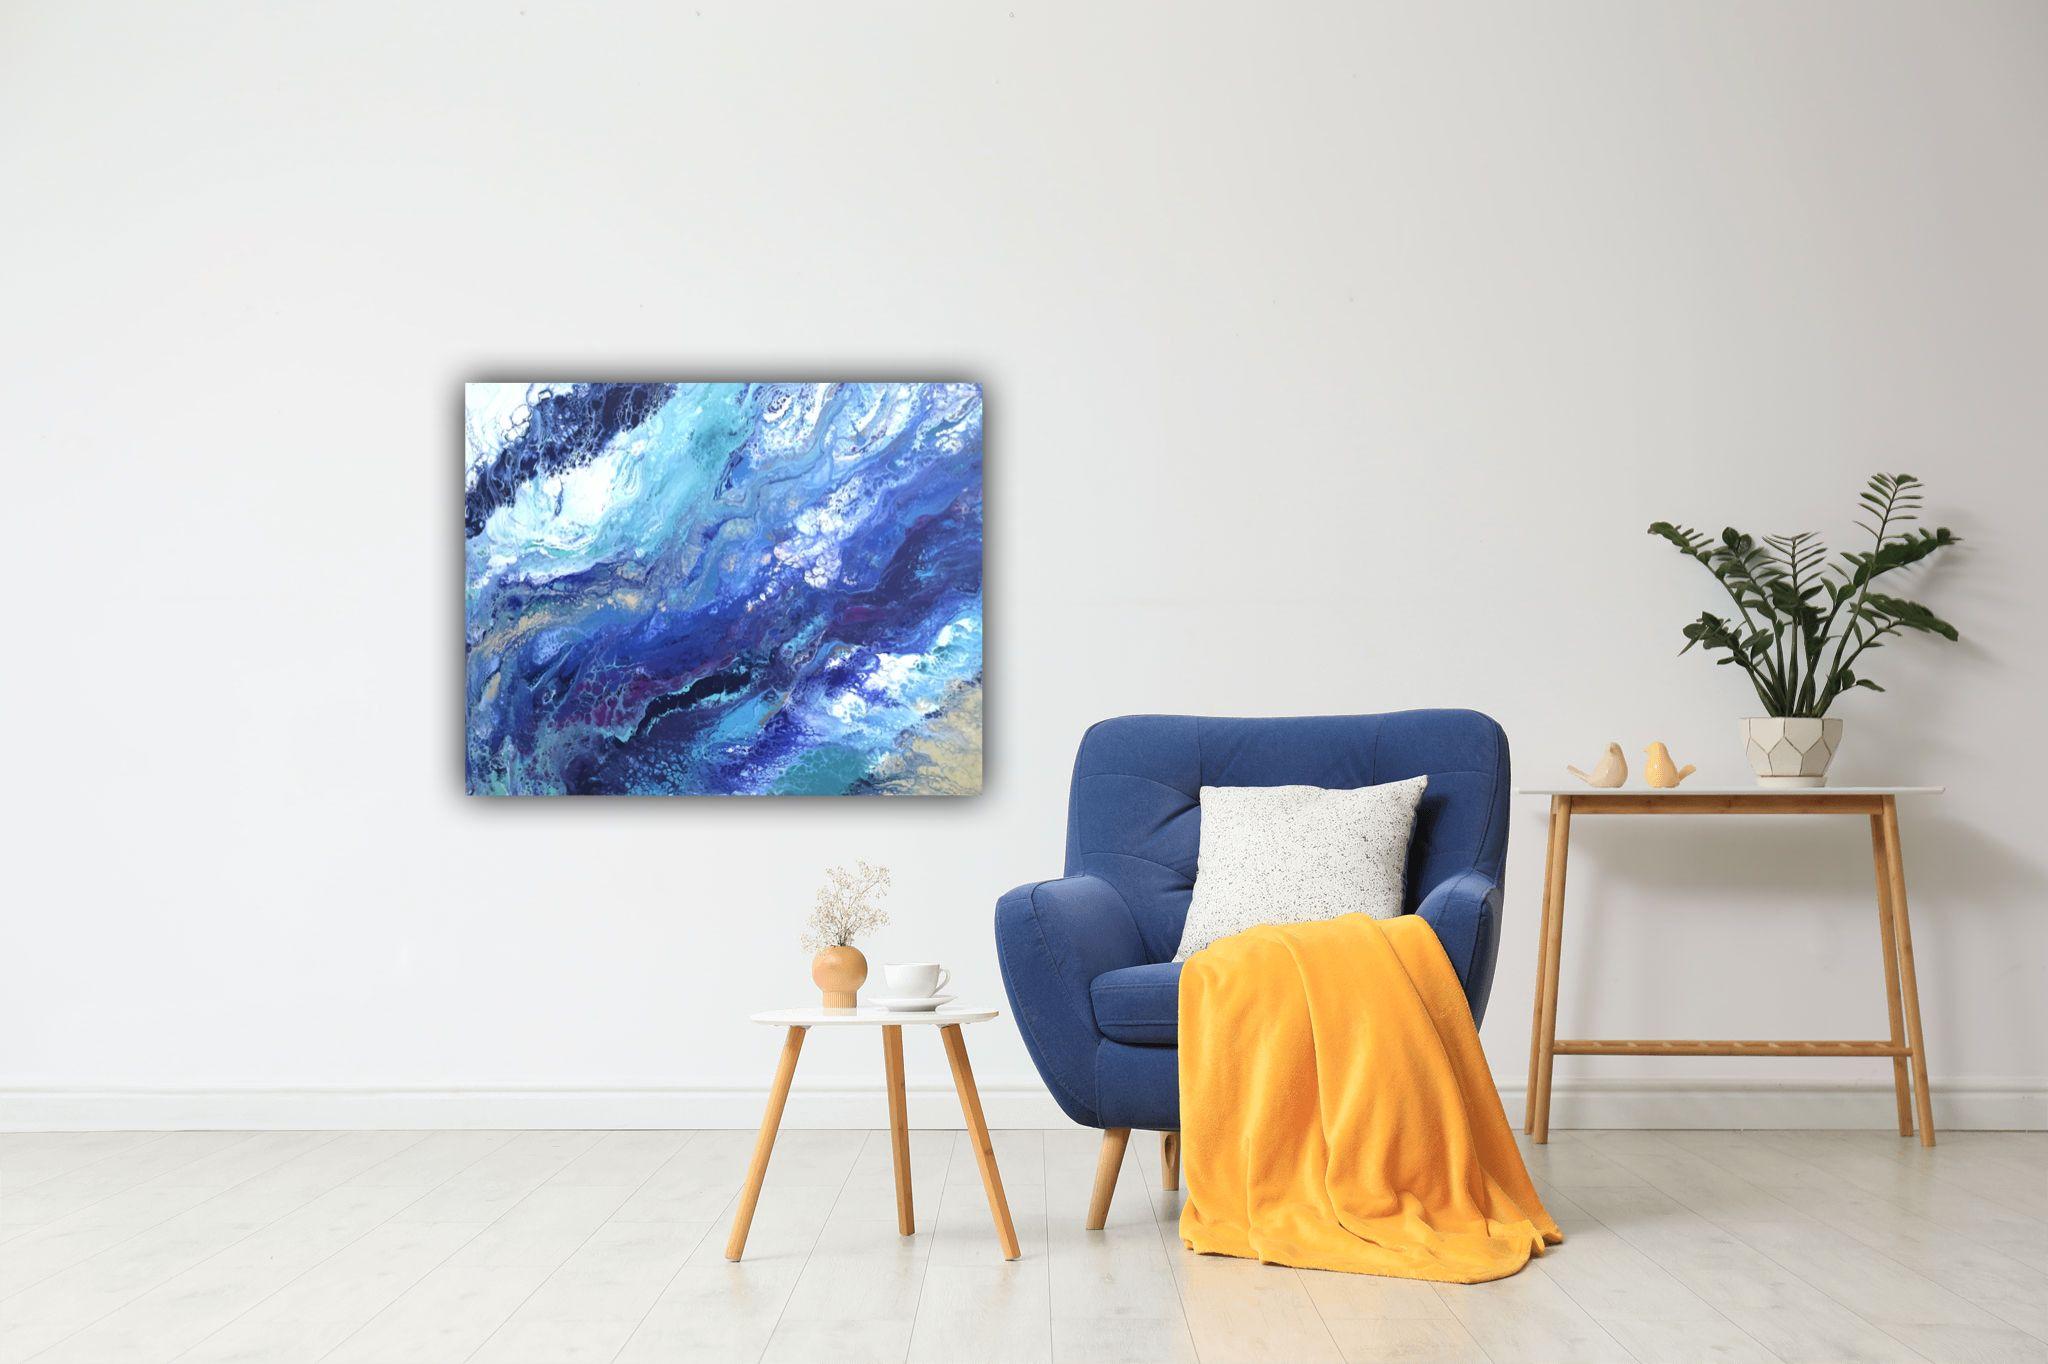 Aerial ocean painting in different shades of blue, turquoise, purple, beige and white inspired by the amazing drone shots over restless deep blue waters and splashing waves.    :: Painting :: Modern :: This piece comes with an official certificate